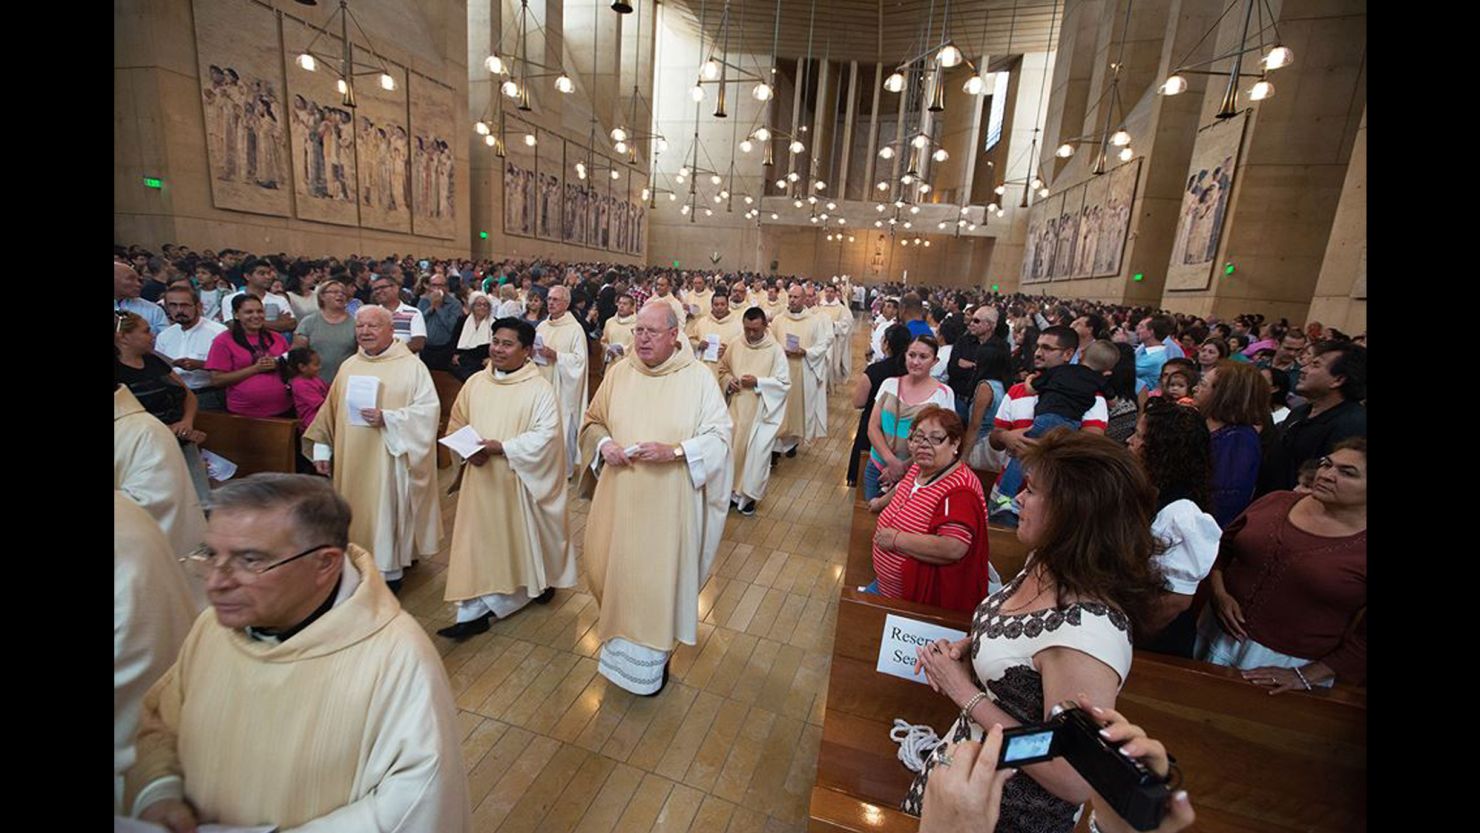 Representatives from parishes from all over Southern California held a special service in 2014 in the Los Angeles cathedral to recognize human rights issues faced by immigrants.